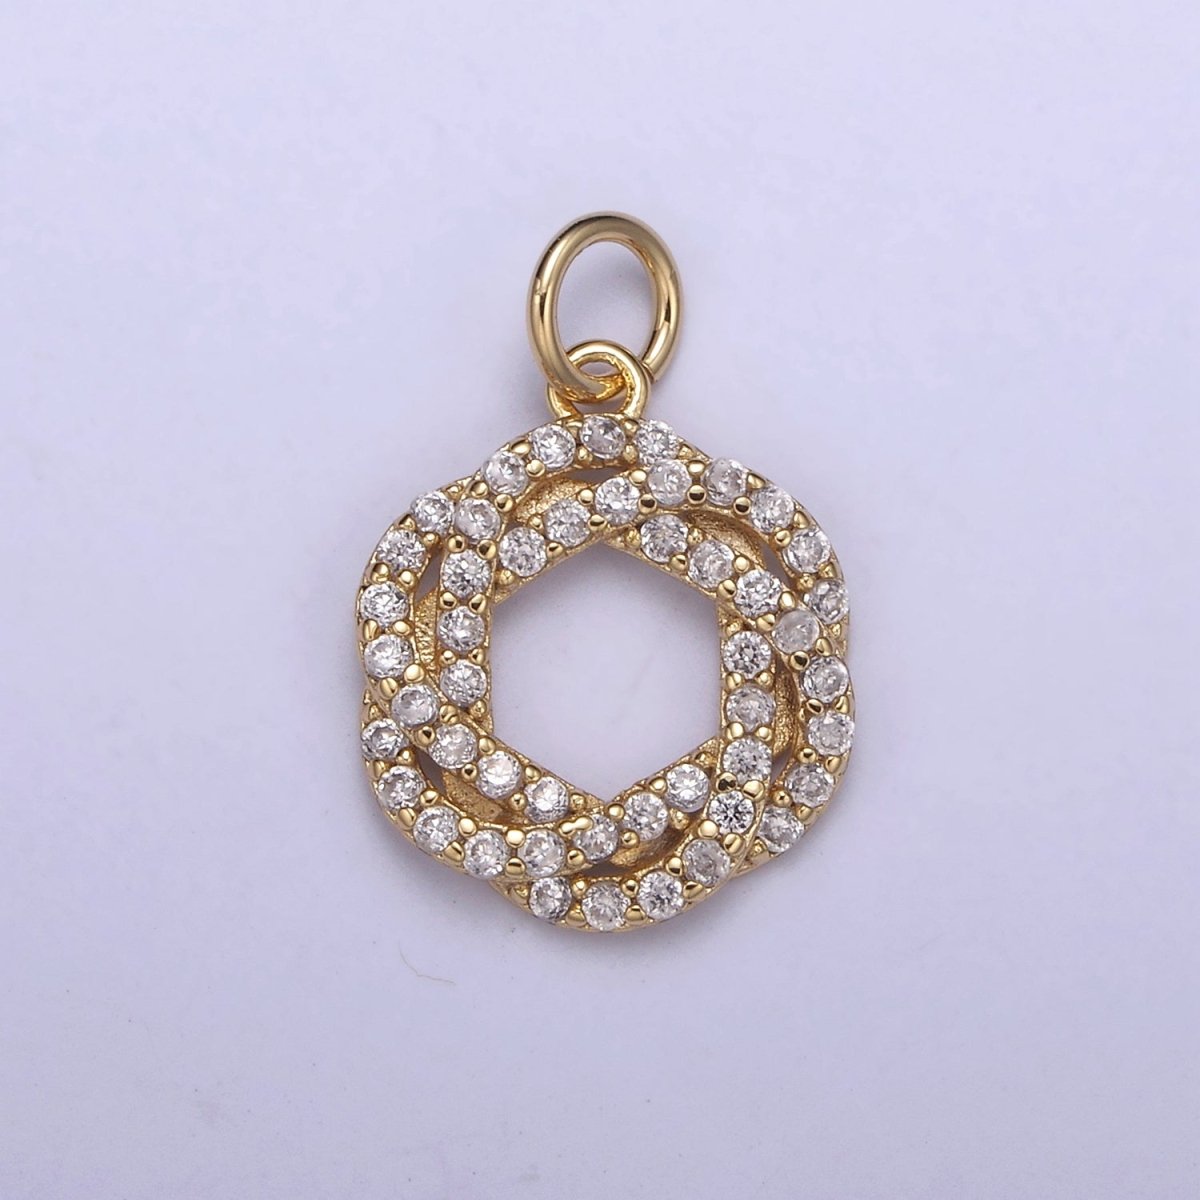 Dainty Flower Charms, Micro Pave Floral Pendant Jewelry 14K Gold Filled Flower Charm Add on Pendant N-410 - DLUXCA